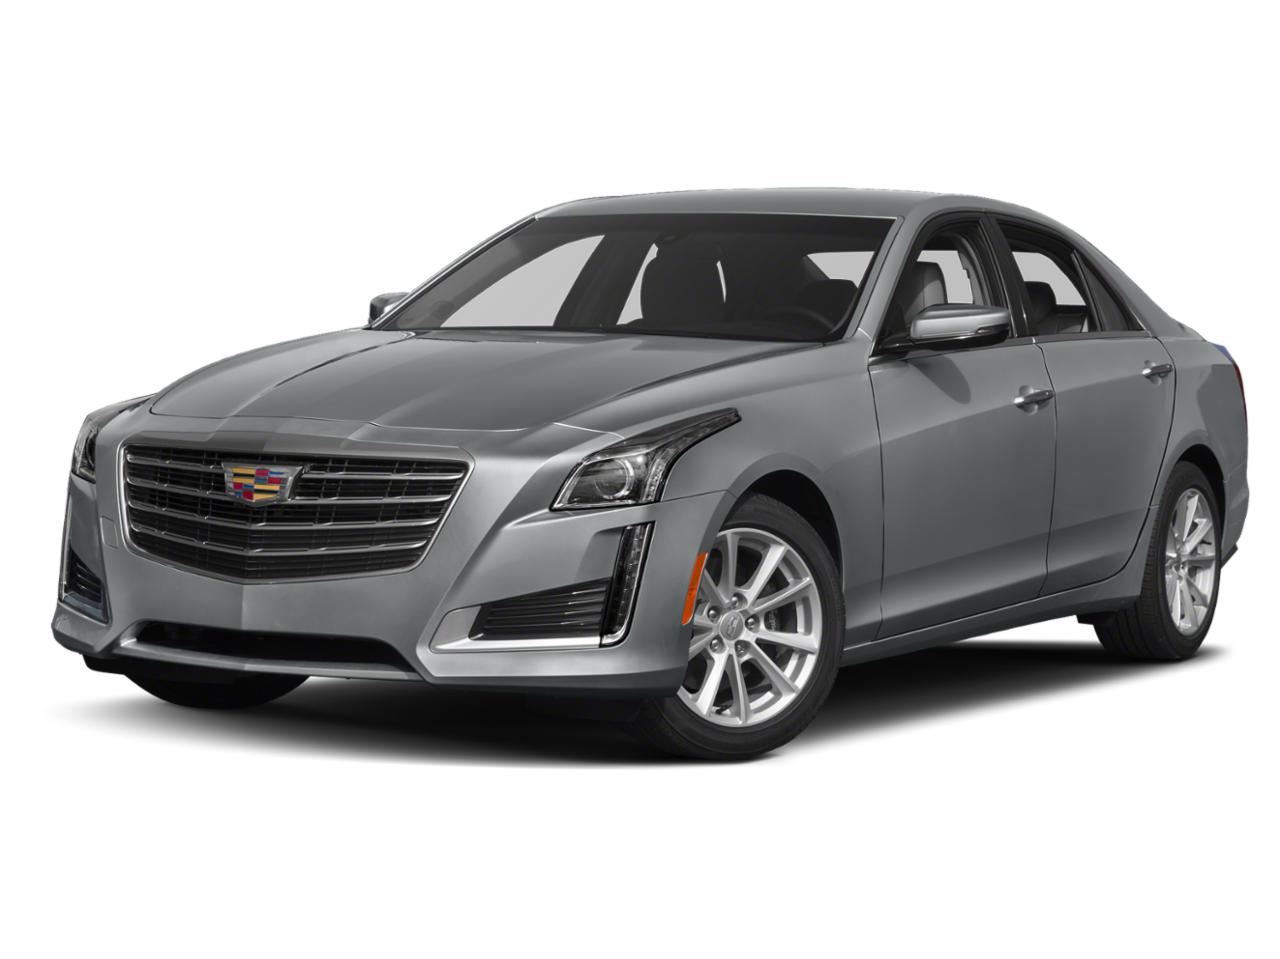 Used Cadillac Cts Sedan North Olmsted Oh